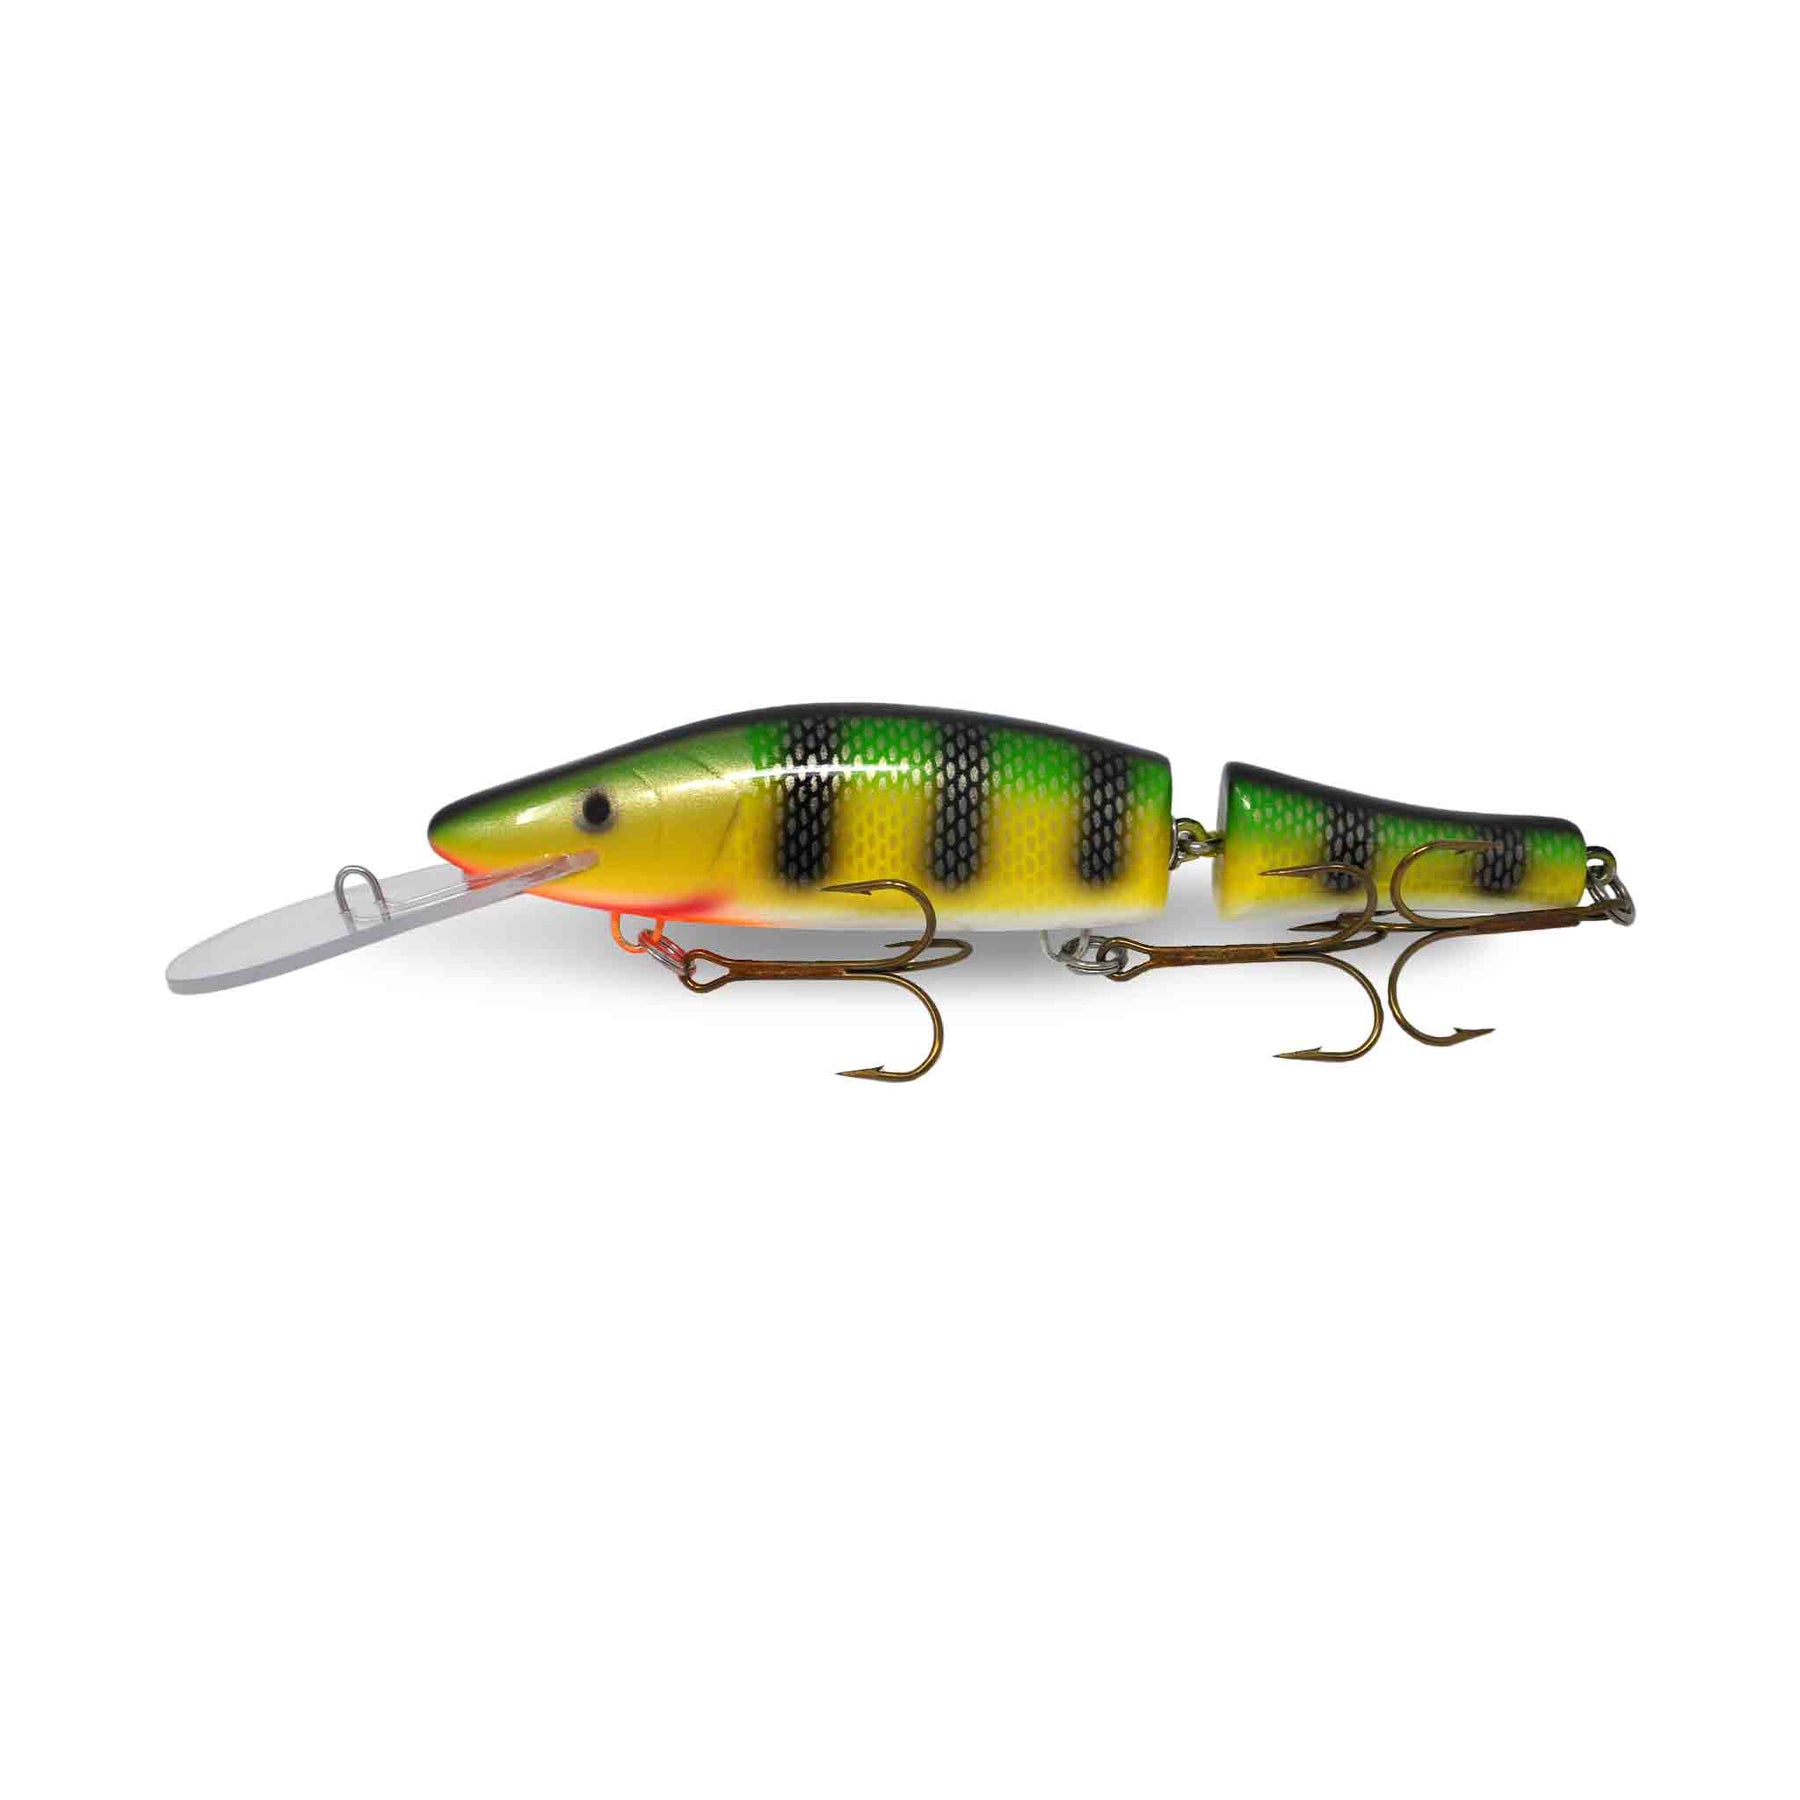 Irresistible freshwater fishing lures for Pike, Perch and Zander